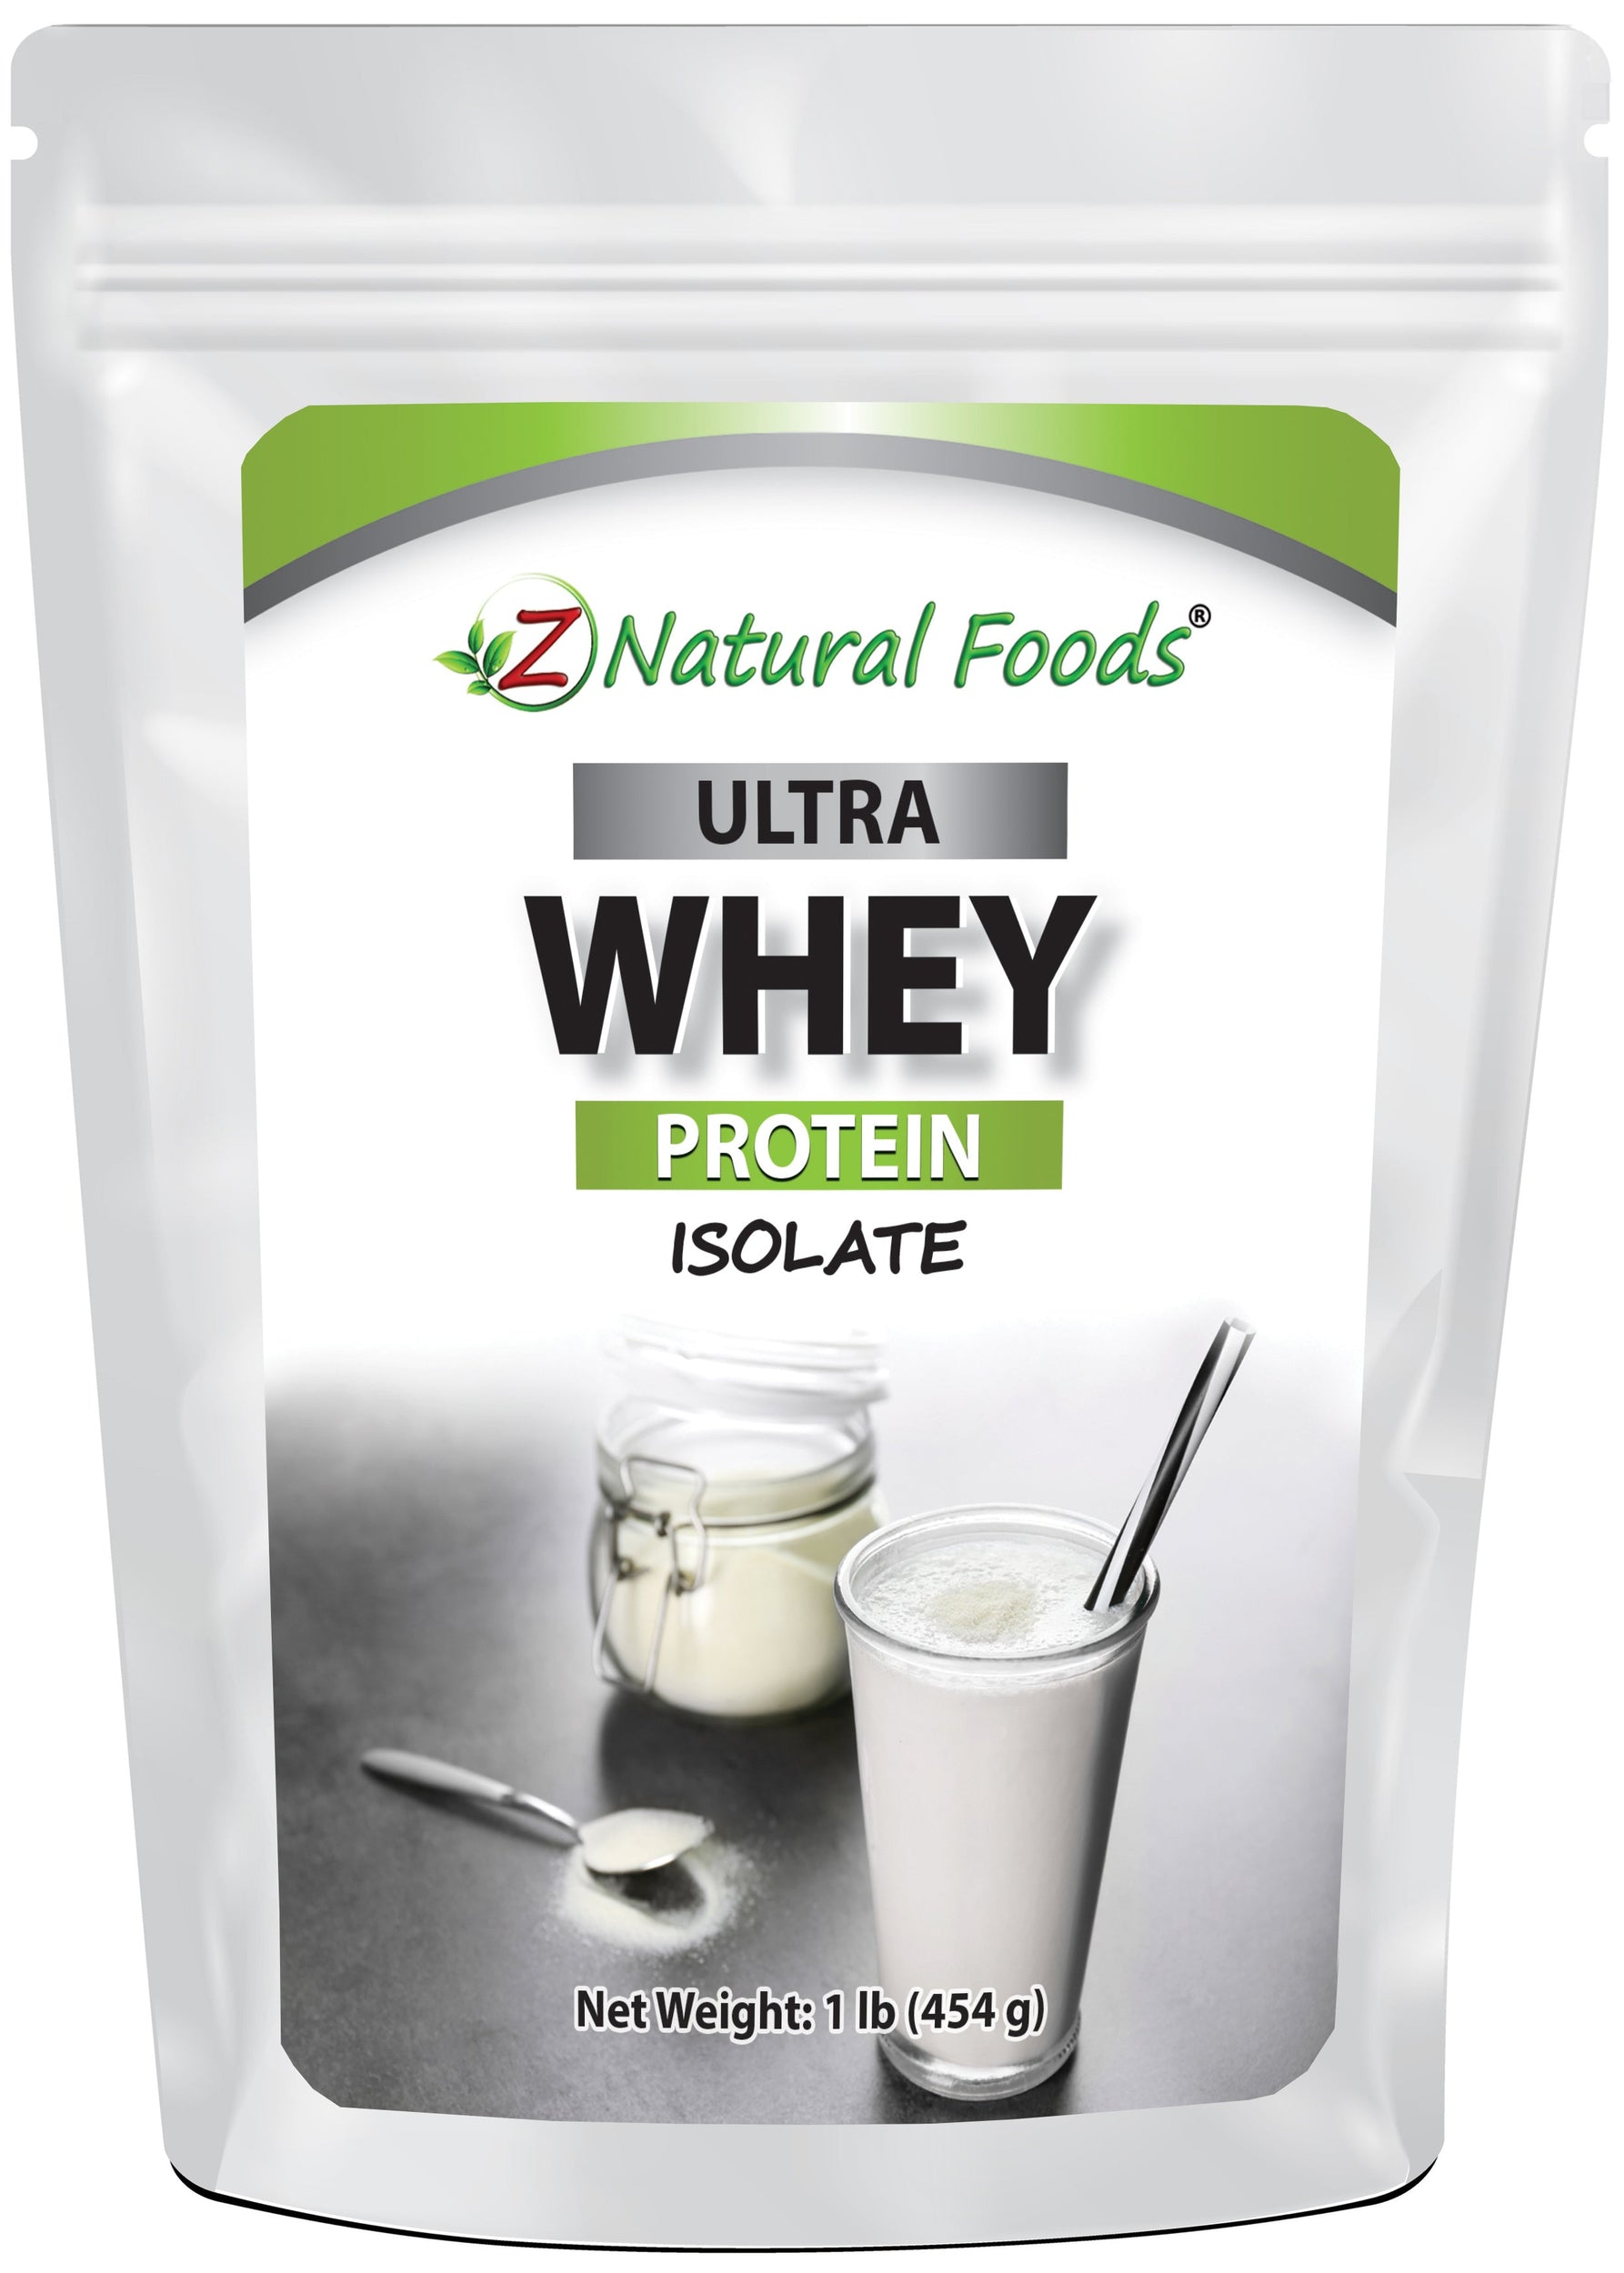 Ultra Whey Protein Isolate